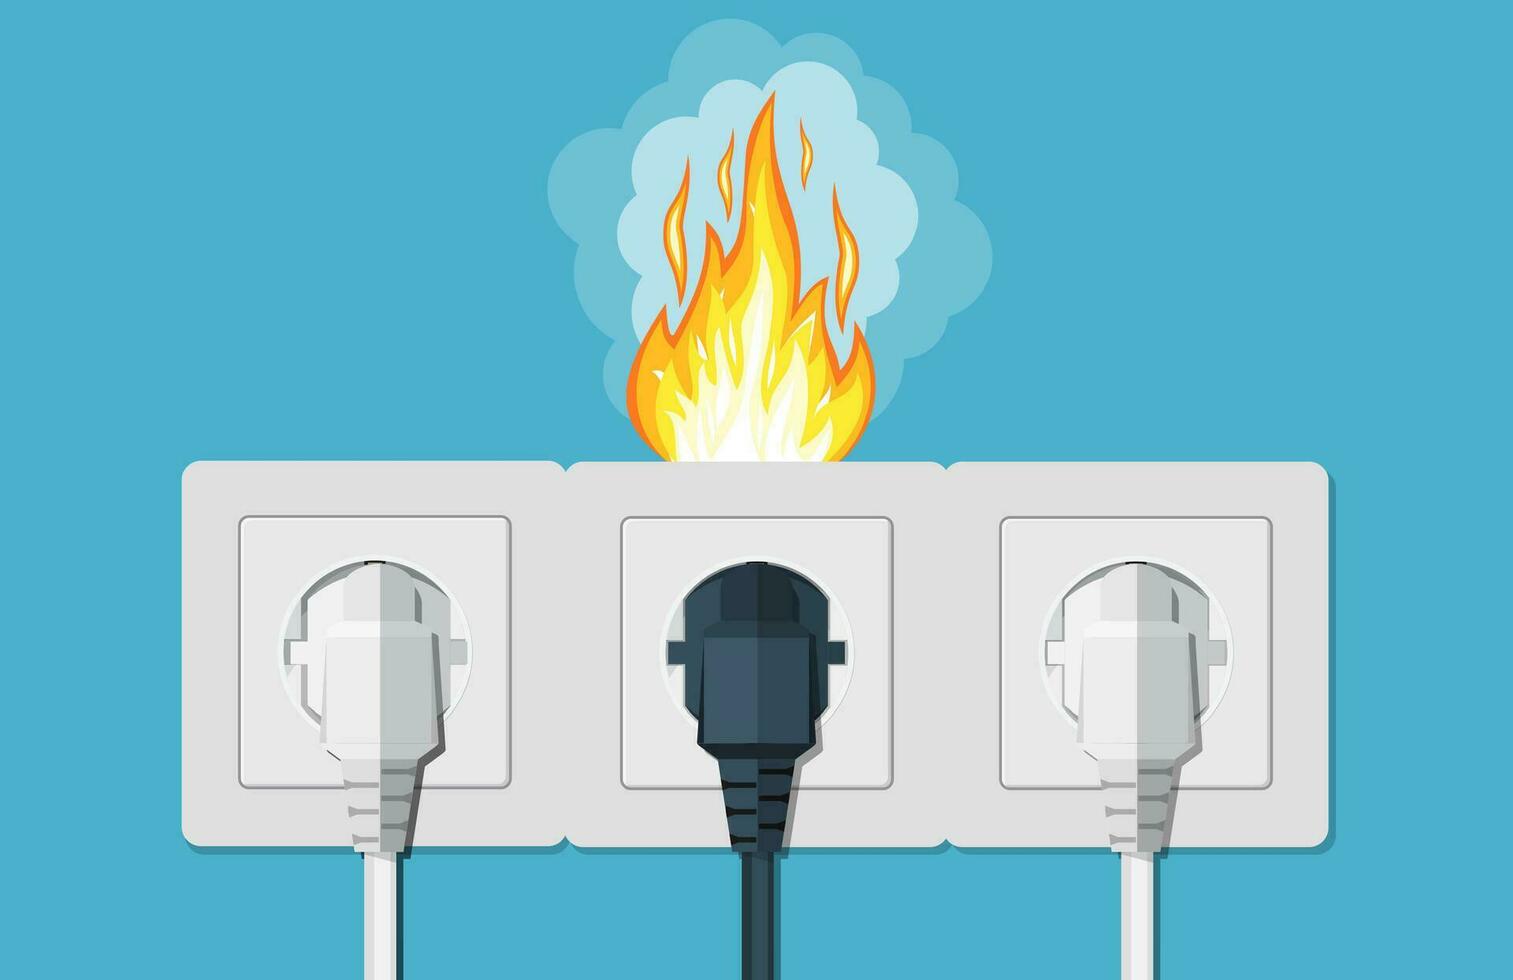 Fire wiring. Socket and plug on fire from overload. Electrical safety concept. Short circuit electrical circuit. Broken electrical connection vector